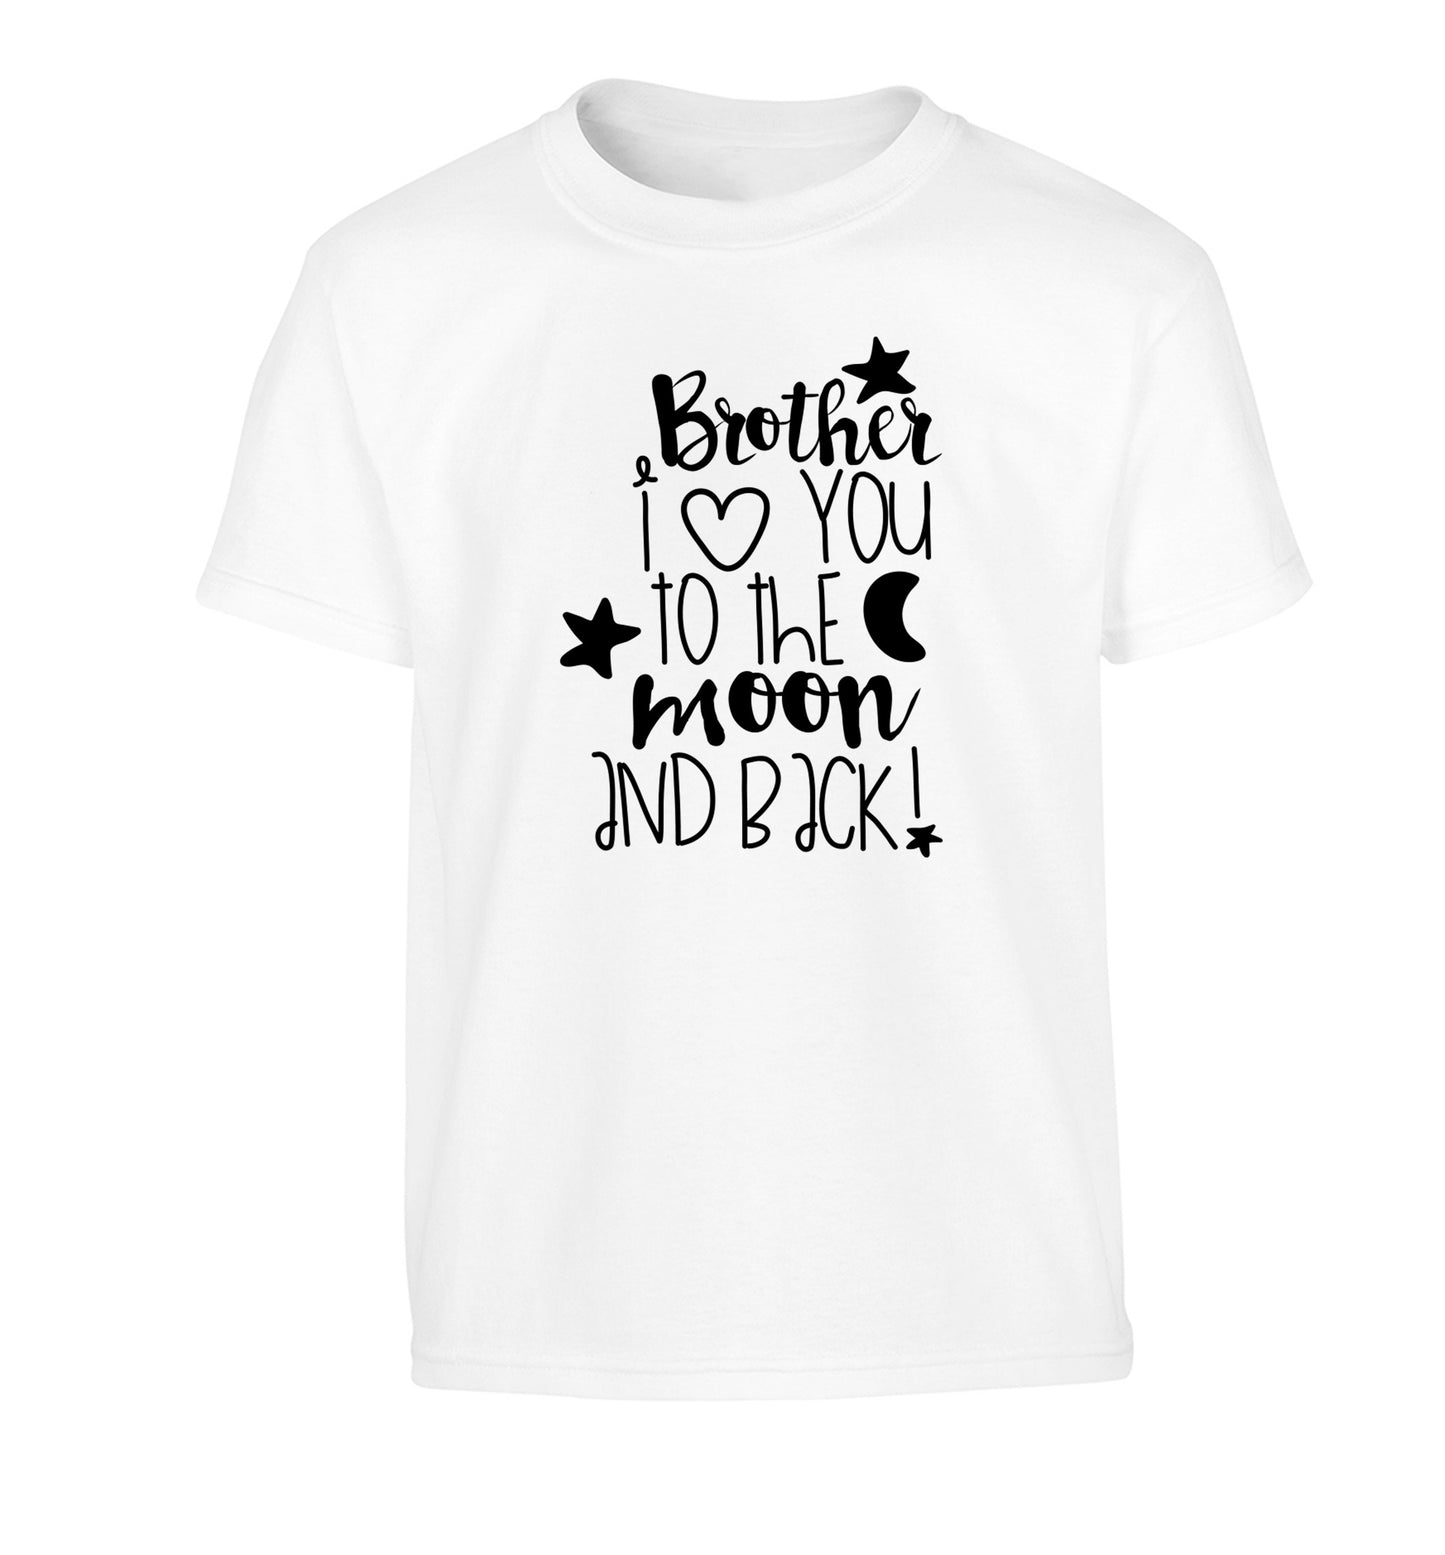 Brother I love you to the moon and back Children's white Tshirt 12-14 Years